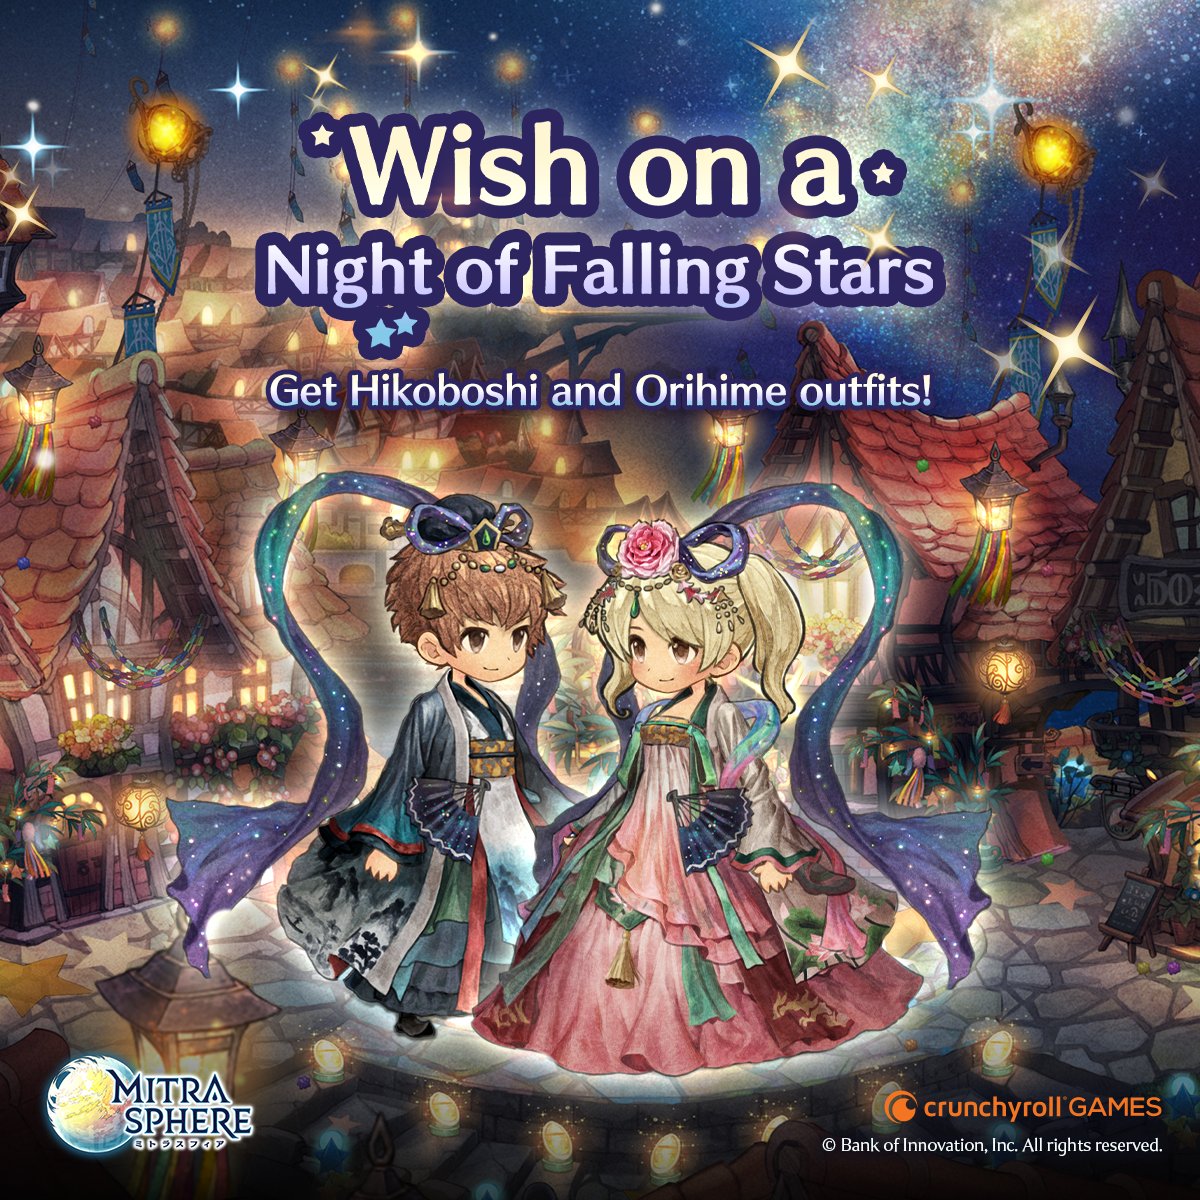 Crunchyroll Games on Twitter "Check out the new 'Wish on a Night of